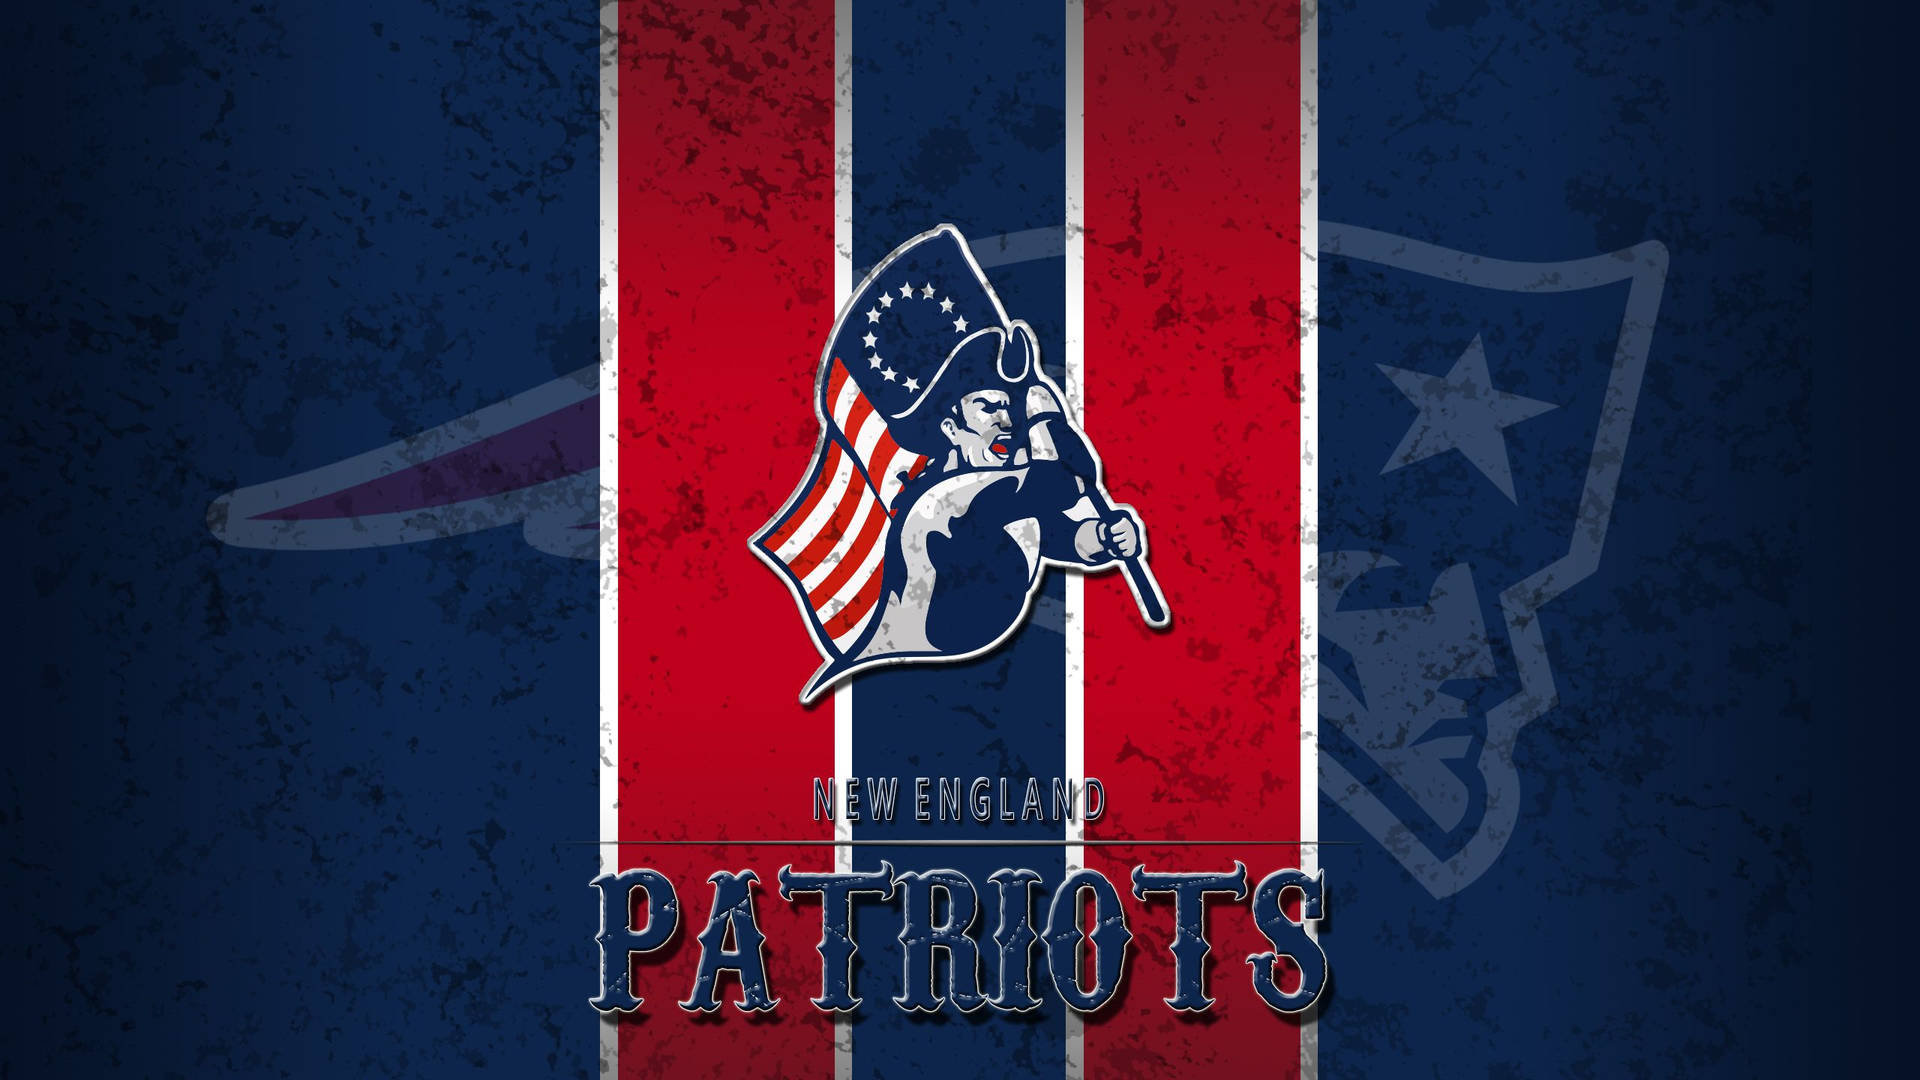 1920x1080 45 New England Patriots Wallpapers \u0026 Backgrounds For FREE